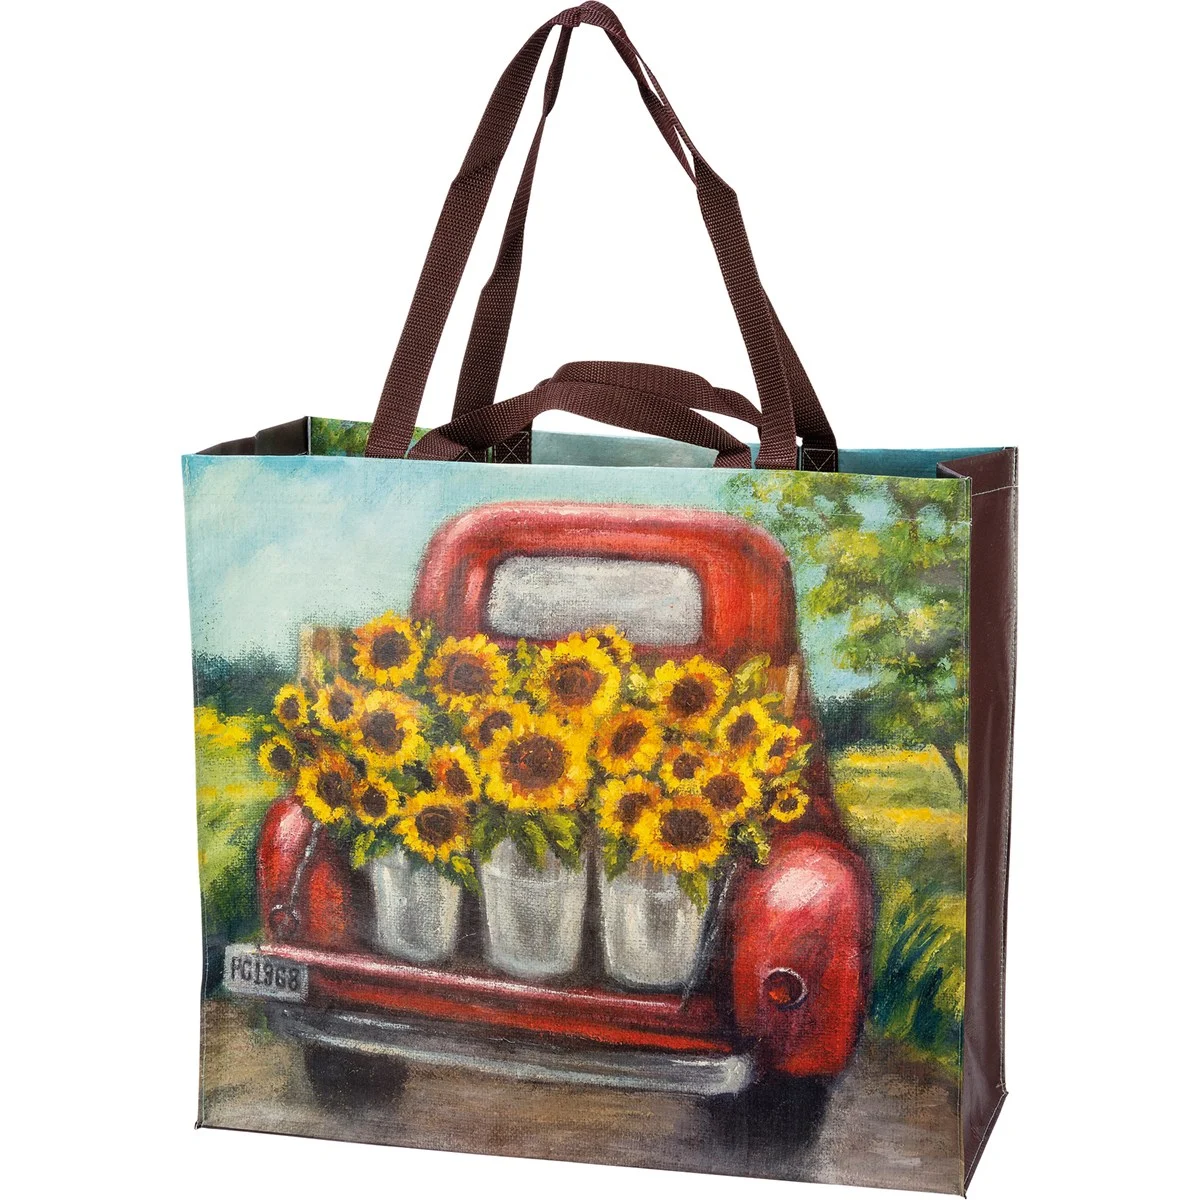 Sunflower Red Truck Large Market Shopping Tote